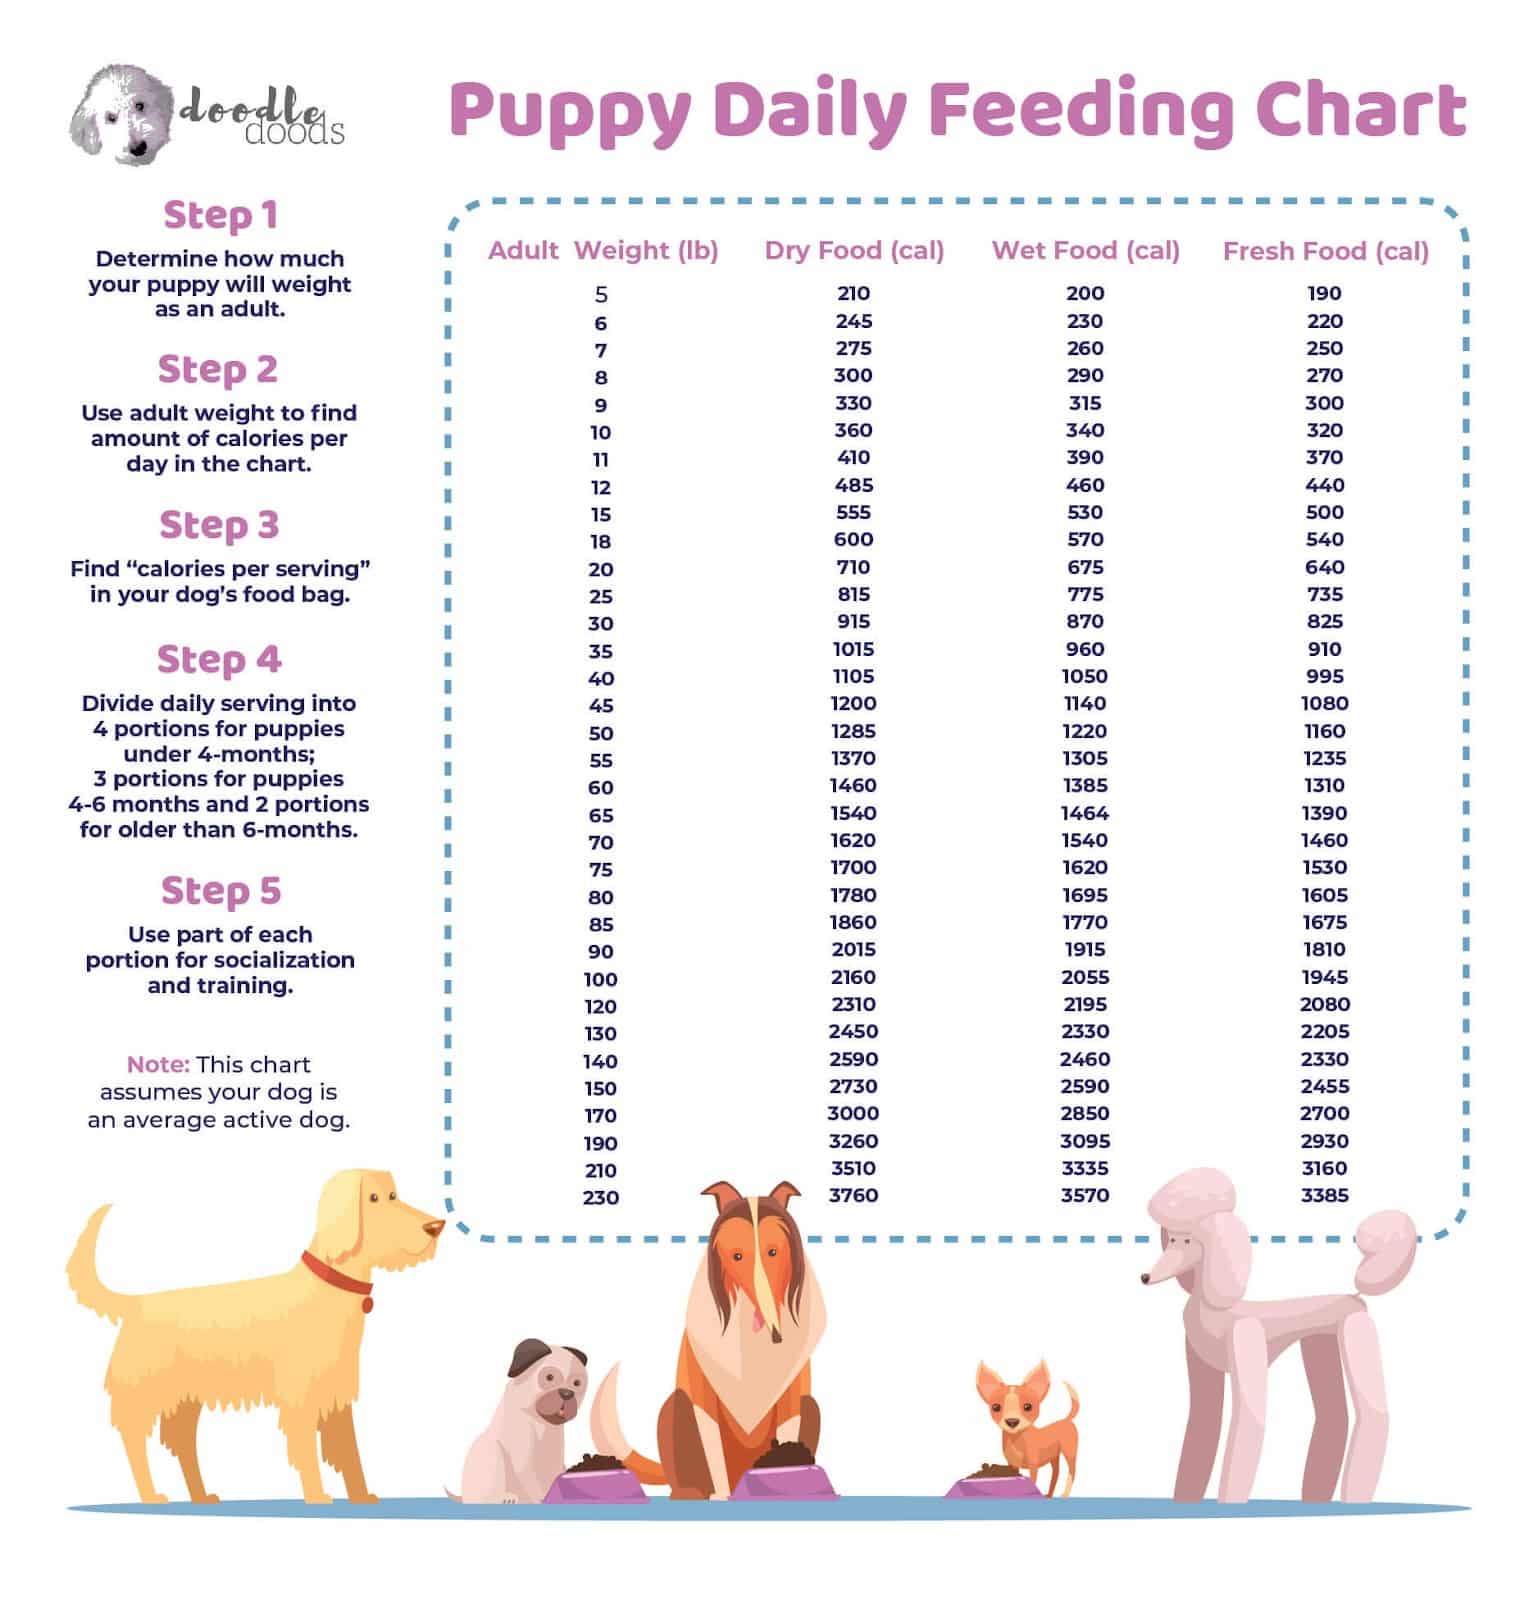 How Much Should I Feed My Dog? Calculator and Feeding Guidelines